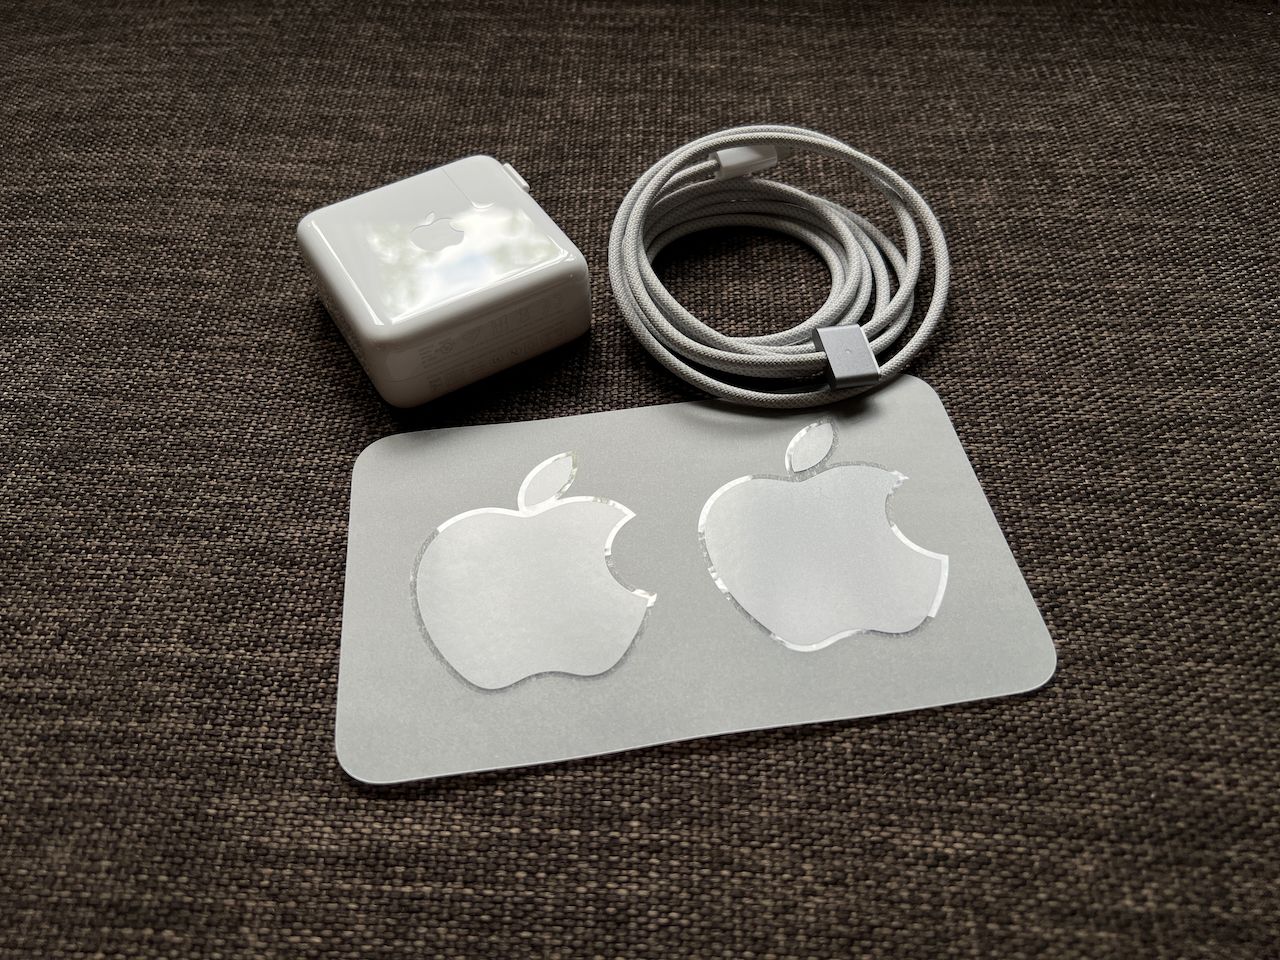 The classic Apple logo decals